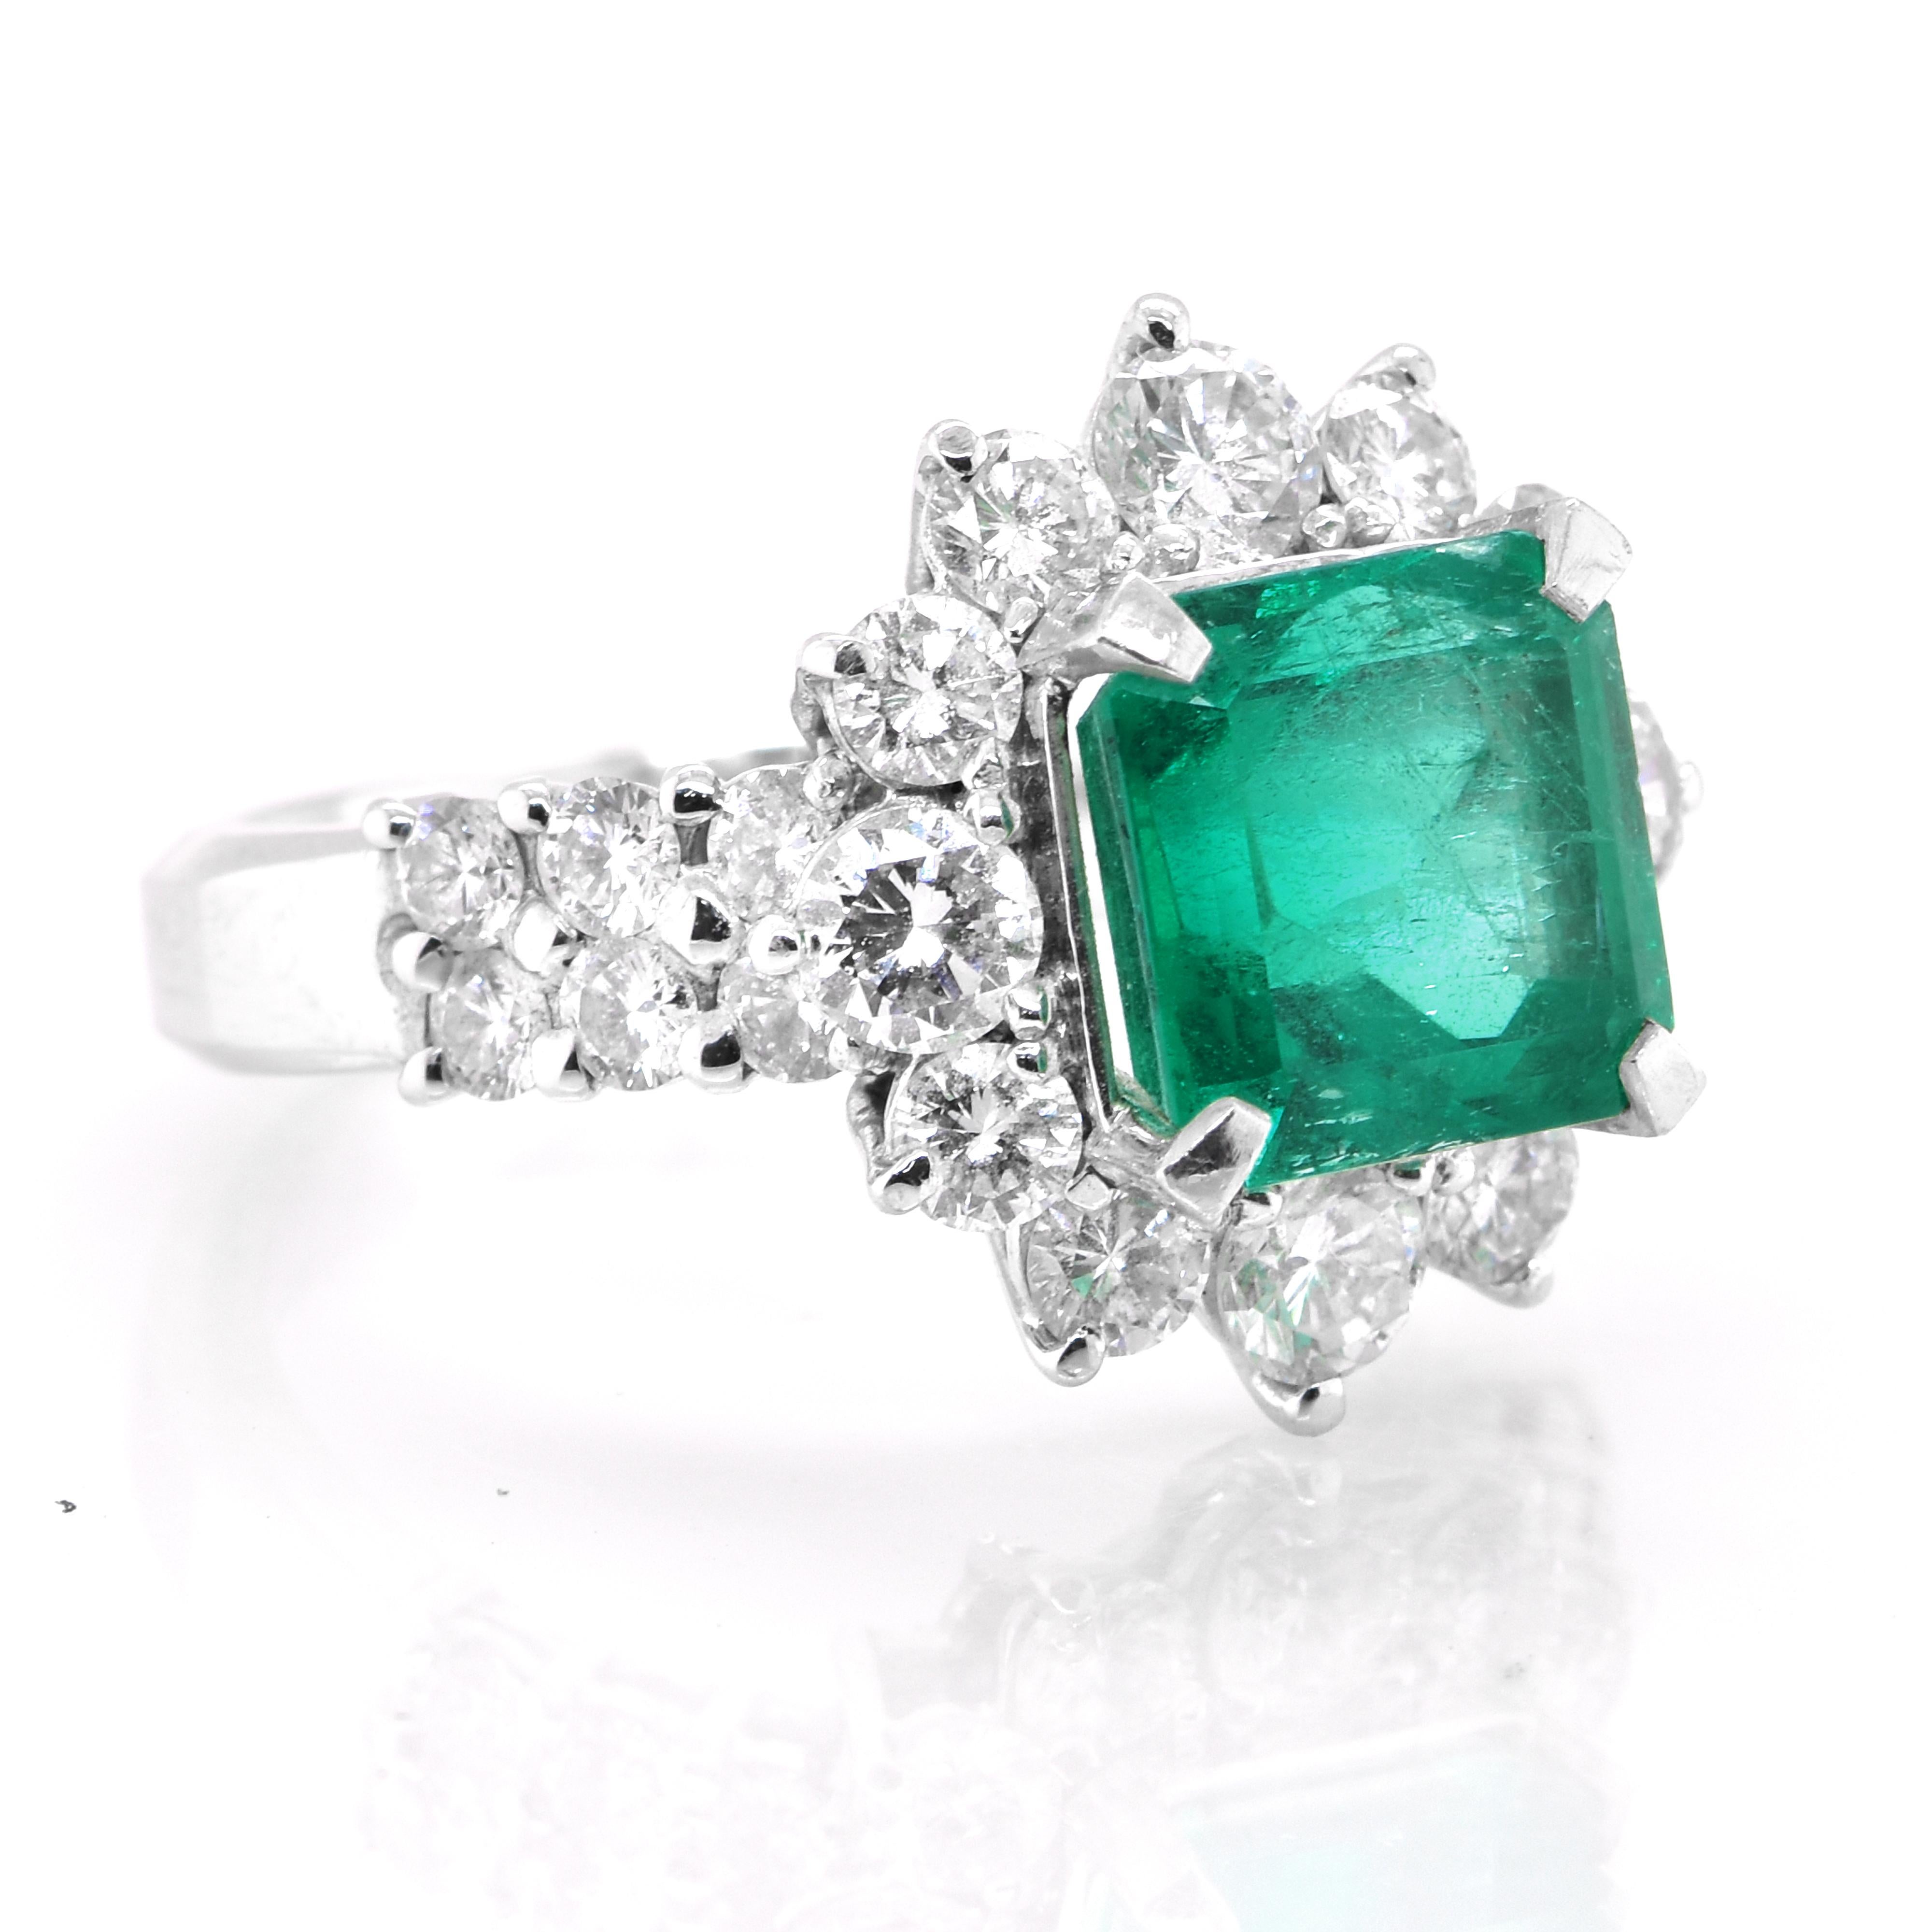 A stunning ring featuring a GIA Certified 3.52 Carat Natural, Minor Oil (F1), Colombian Emerald and 1.83 Carats of Diamond Accents set in Platinum. People have admired emerald’s green for thousands of years. Emeralds have always been associated with